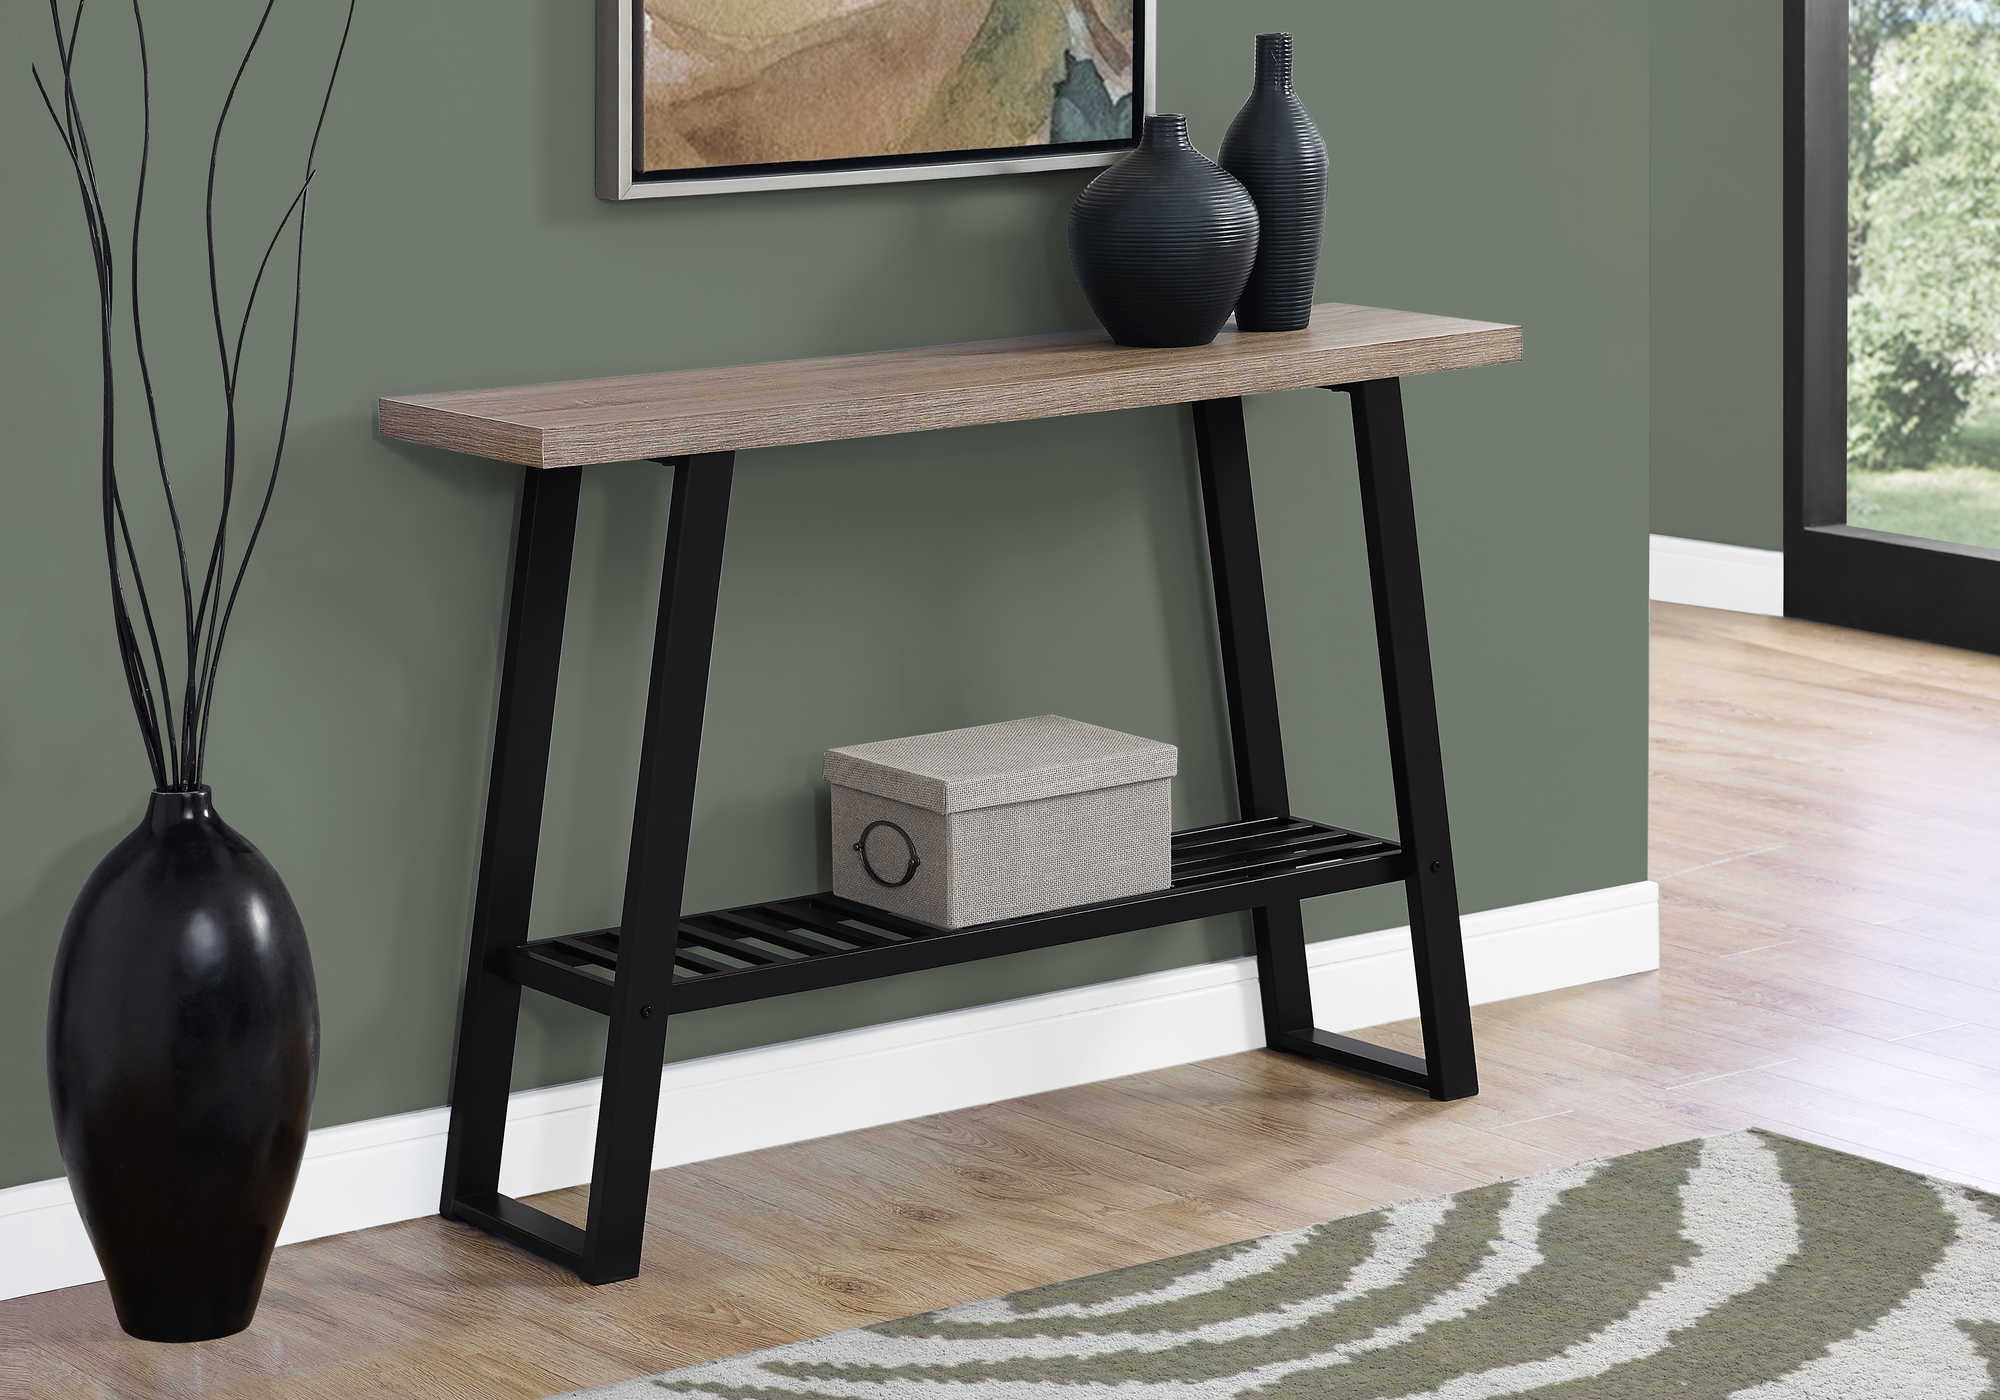 ACCENT TABLE - 48"L / DARK TAUPE / BLACK HALL CONSOLE